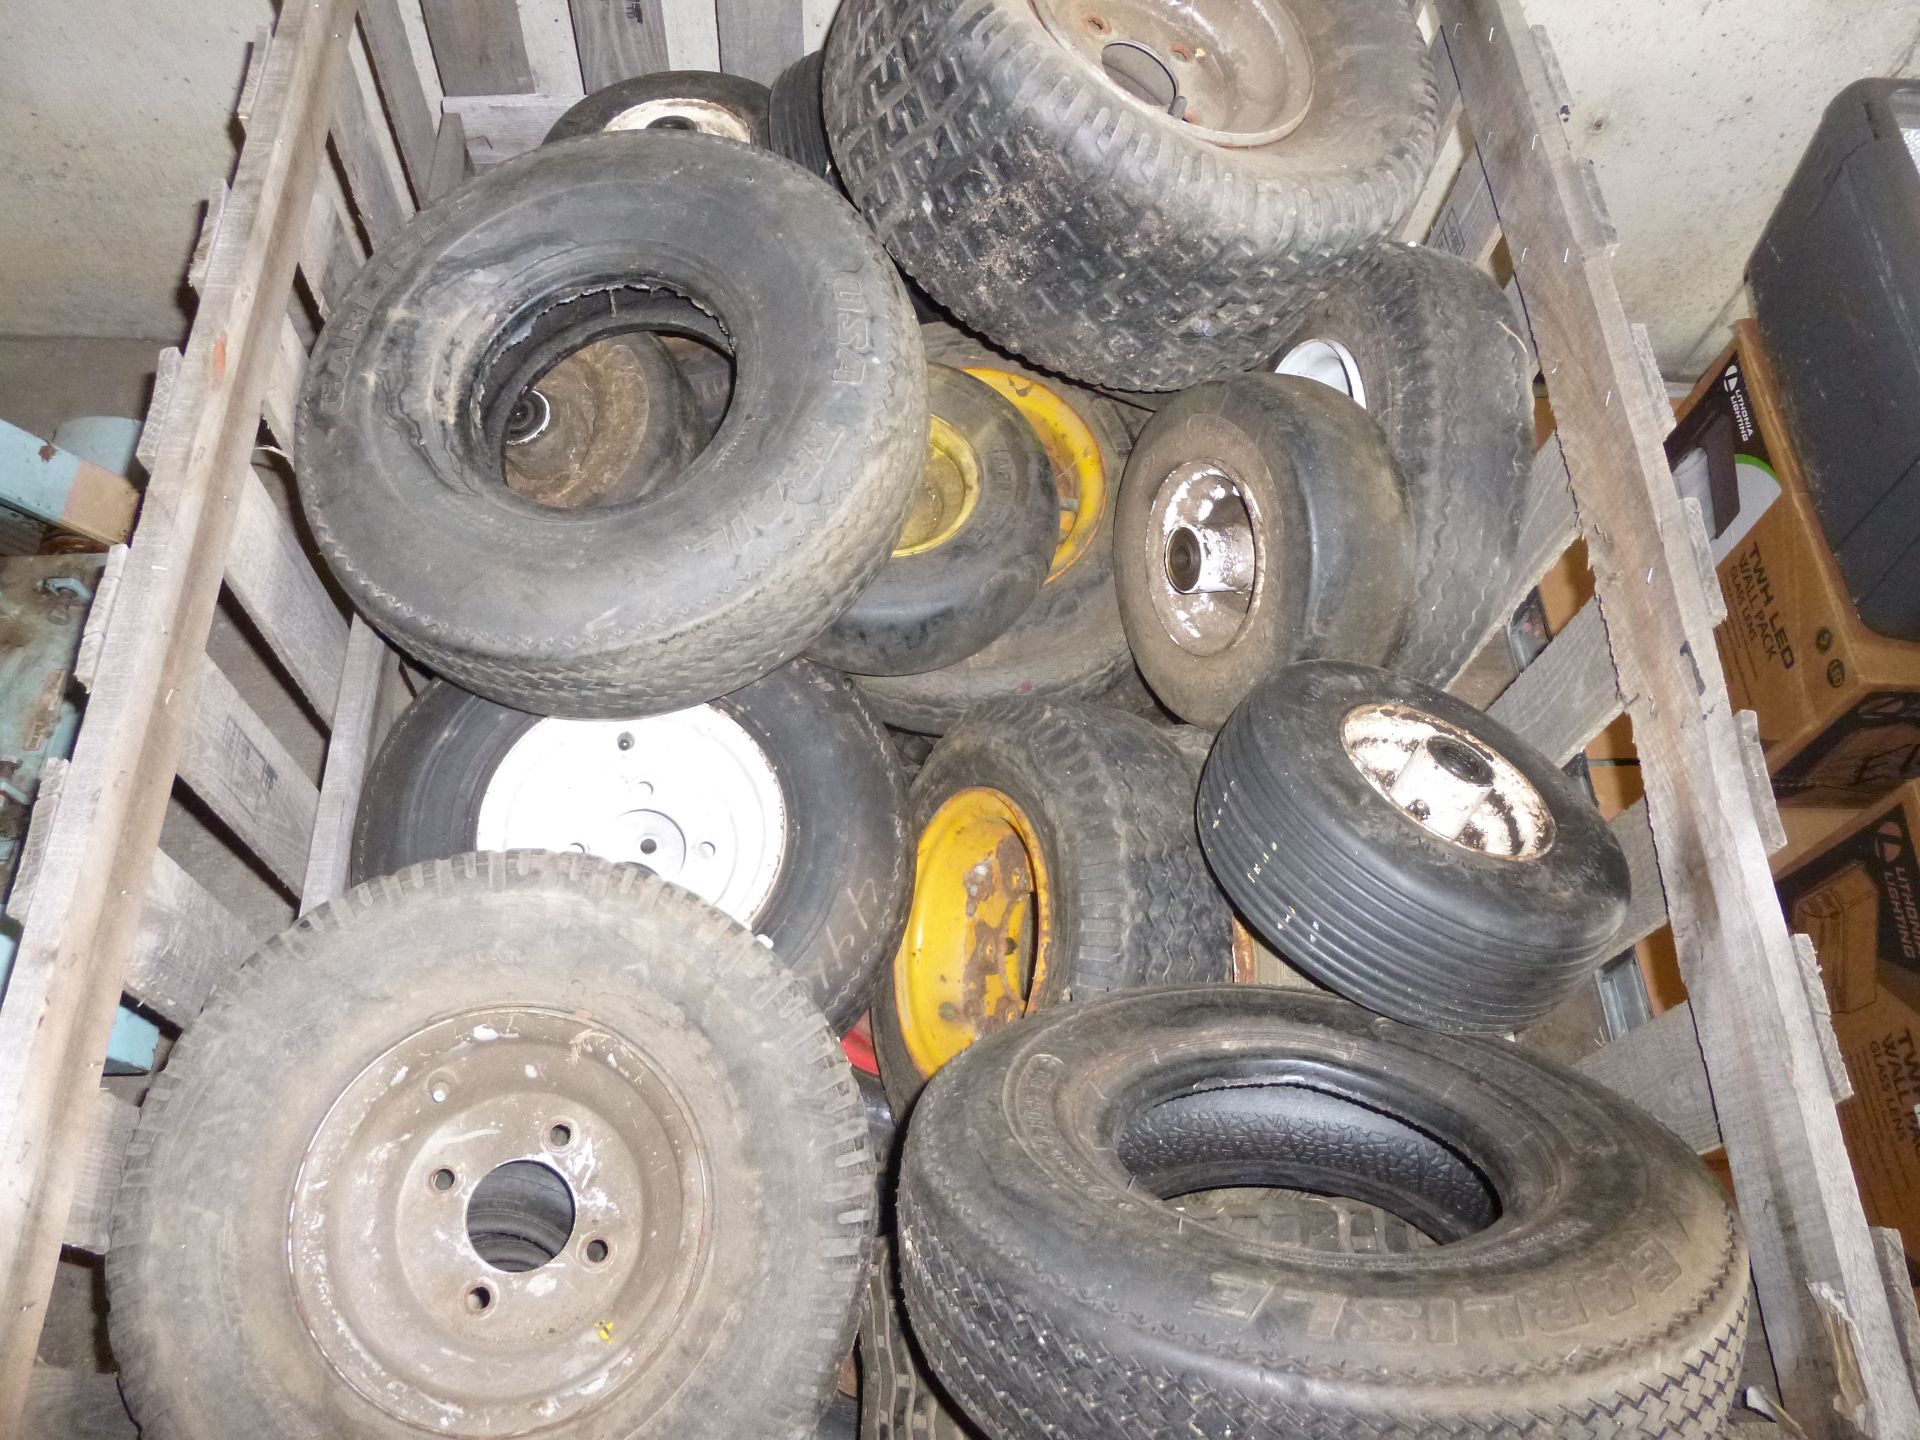 Hopper of wheels and tires for mowers and small trailers, some are used and some are new old stock - Image 2 of 2